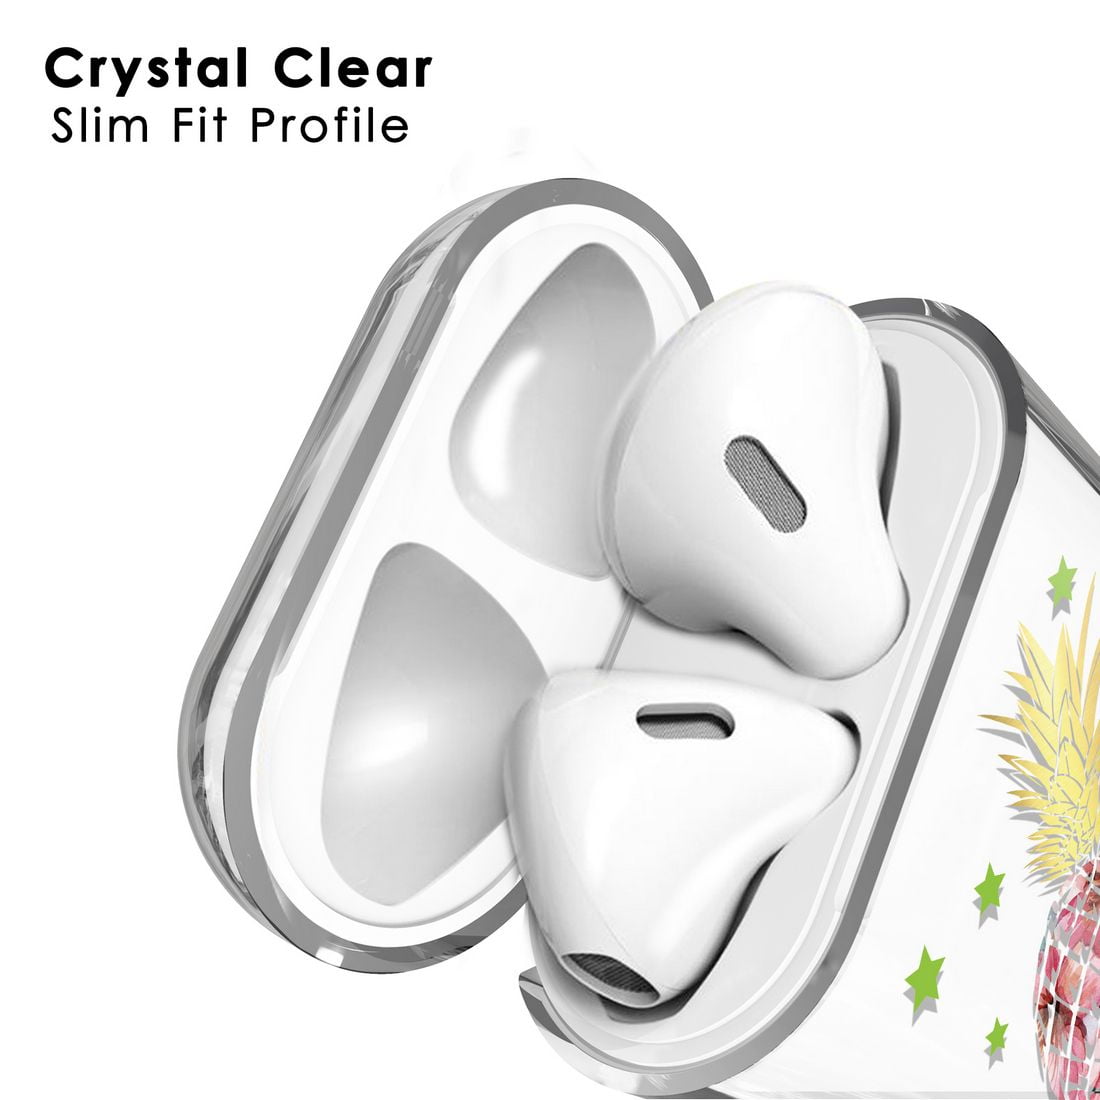 [Slim Lightweight] Protective Case Bundle for Apple AirPods (Gen 1, 2) with EDC Tactical Travel Pouch and Atom Cloth (Pineapple) Walmart.com